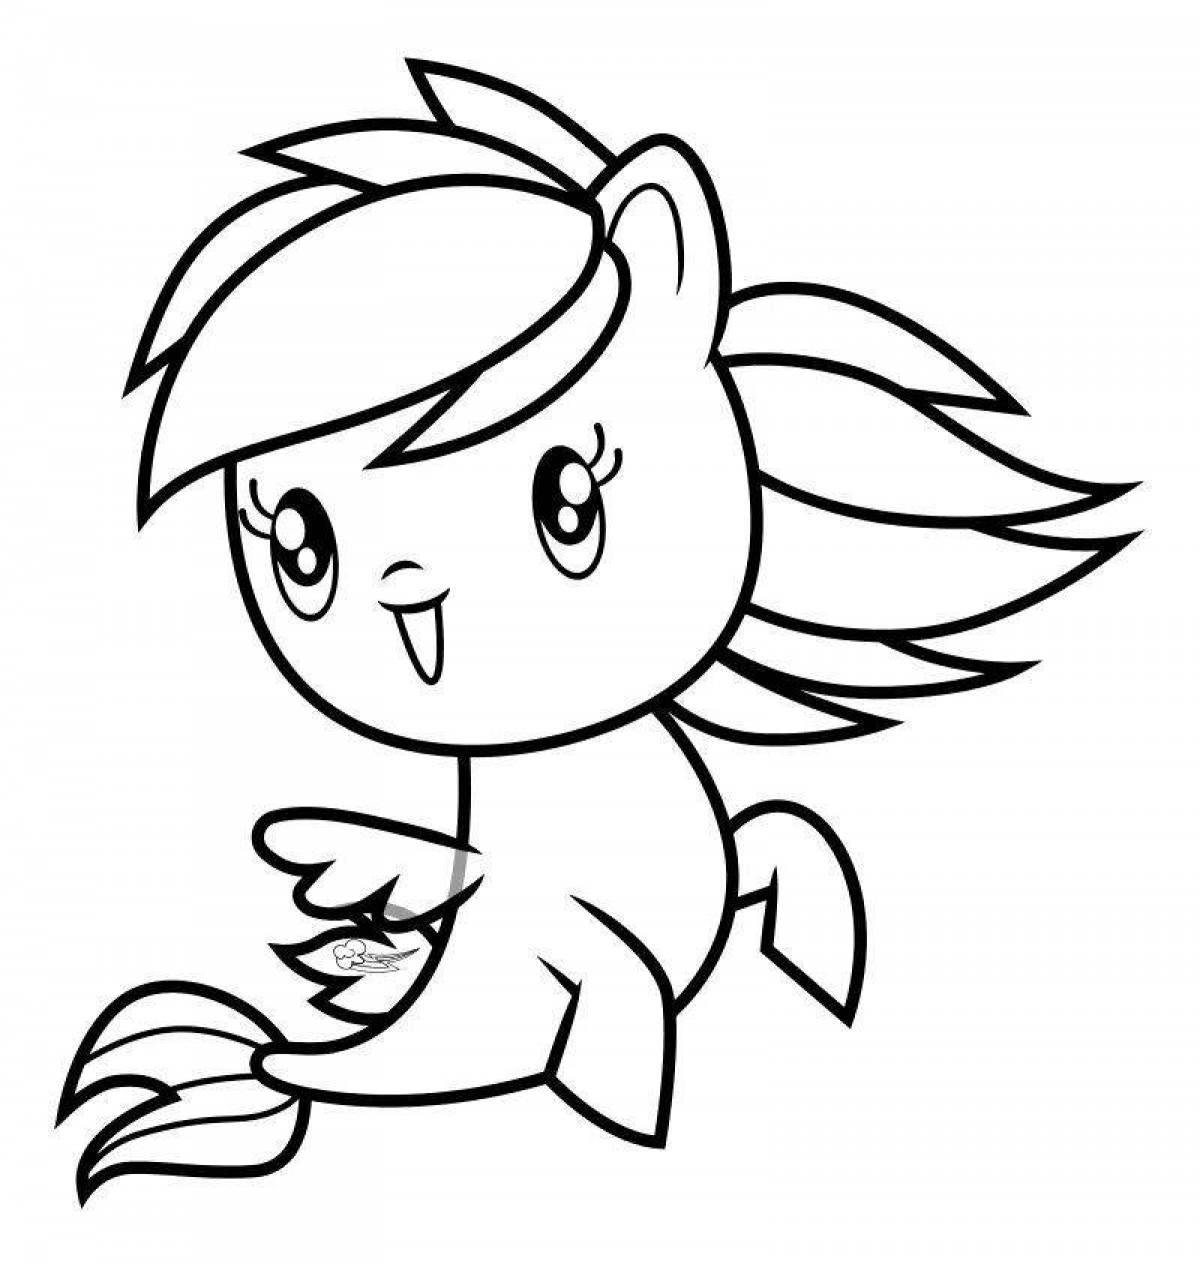 My little pony rainbow dash coloring book